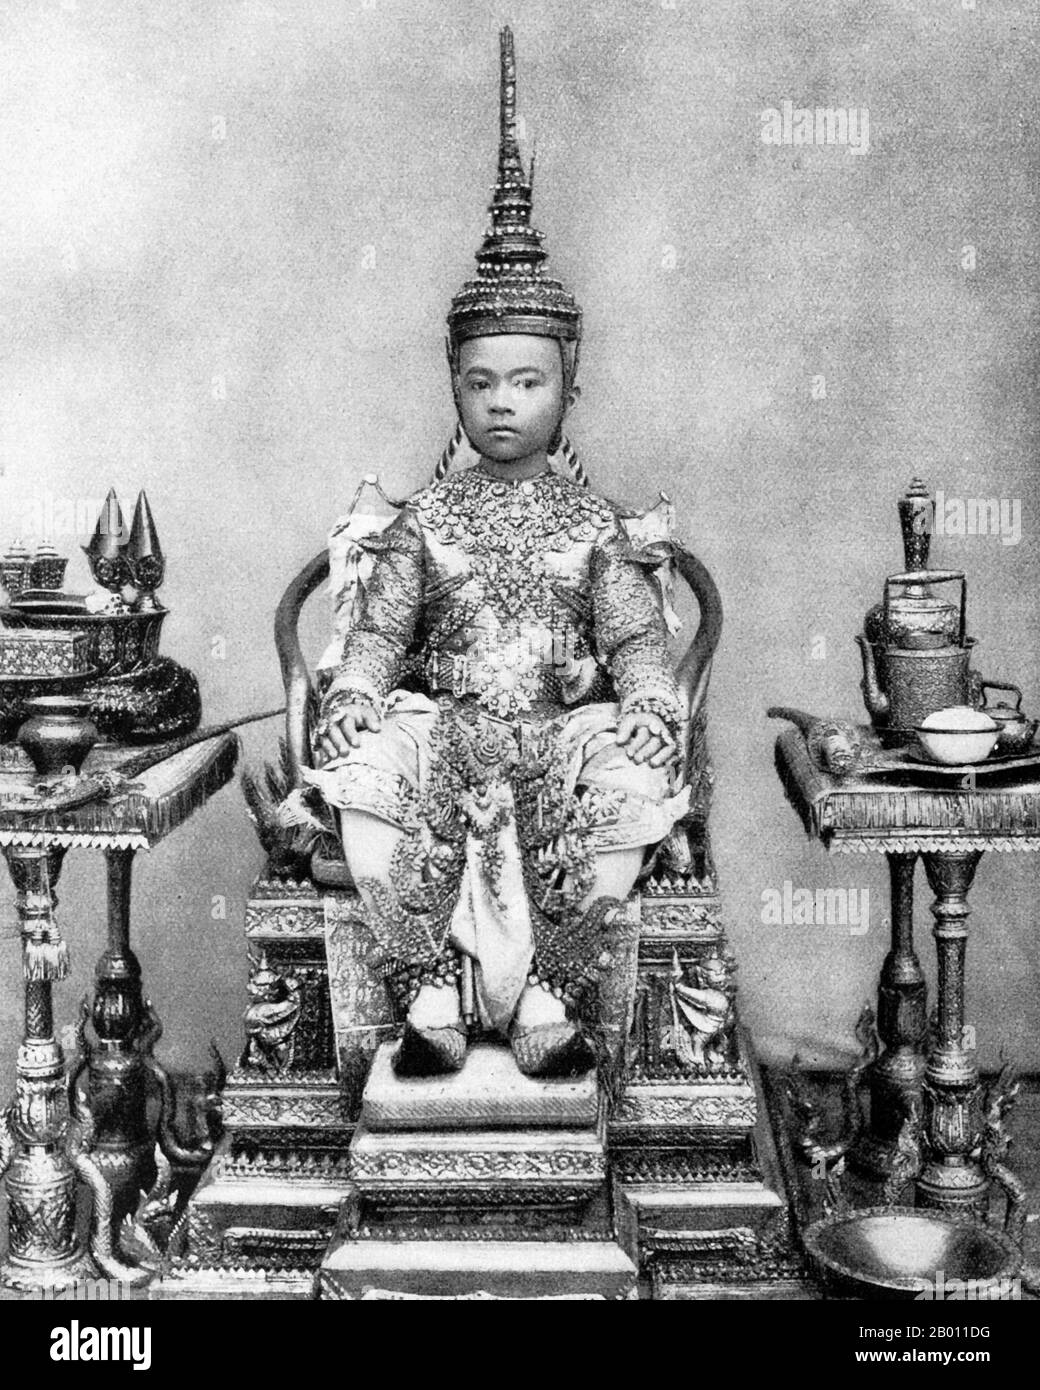 Thailand: A royal prince dressed and adorned for his tonsure ceremony, Siam, late 19th century.  In 19th-century Siam, almost every young male in the royal family entered the ‘sangha’ or Buddhist monkhood as a rite of passage. The tonsure ceremony was an initial act of this rite as all novices must have their heads shaved to enter the monastic order. The tradition survives to this day, not just among Thai royalty, but at all levels of society. Stock Photo